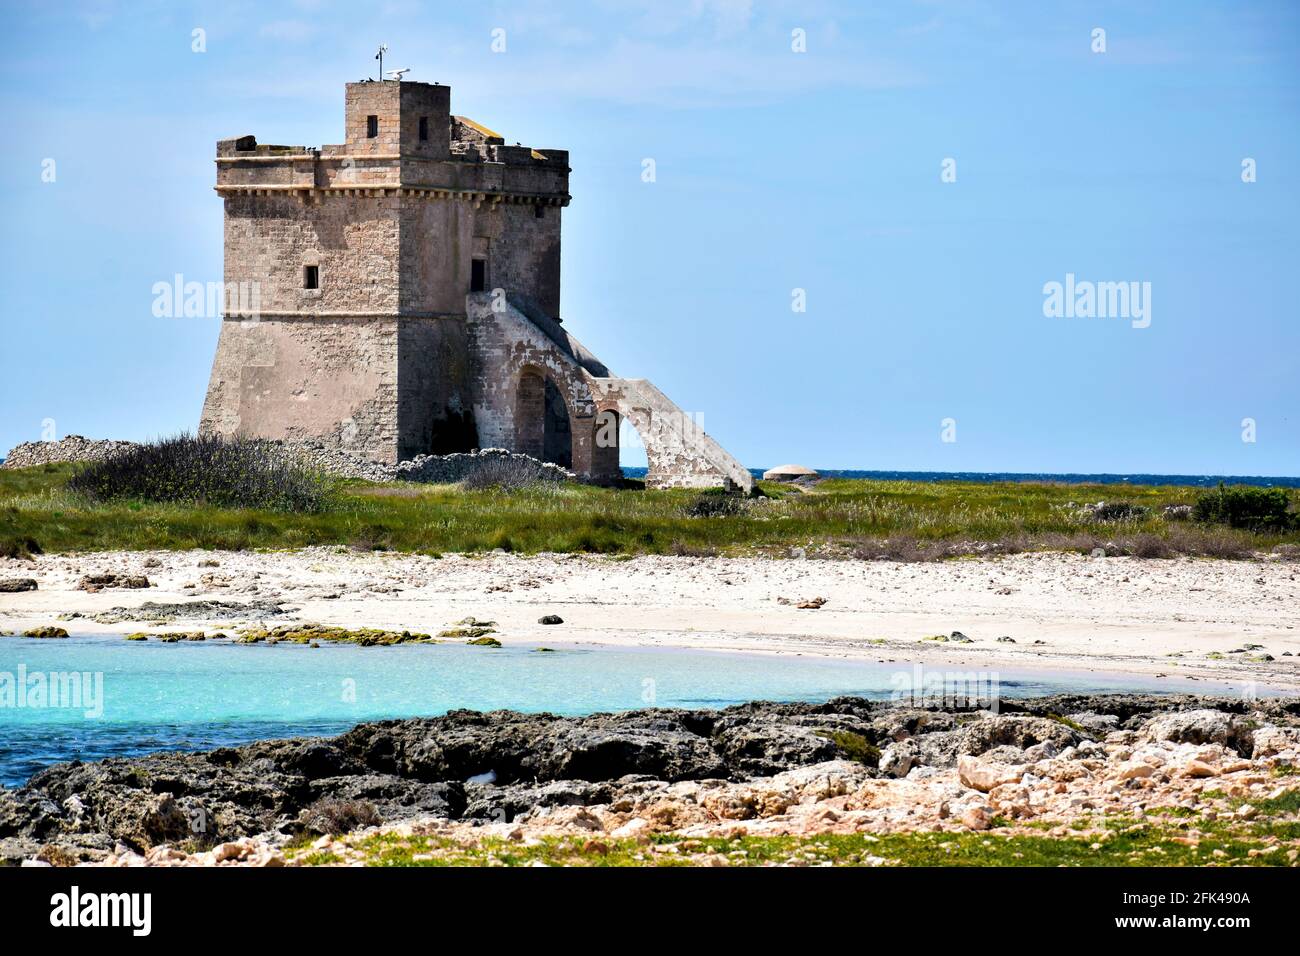 Tower by the coast Stock Photo